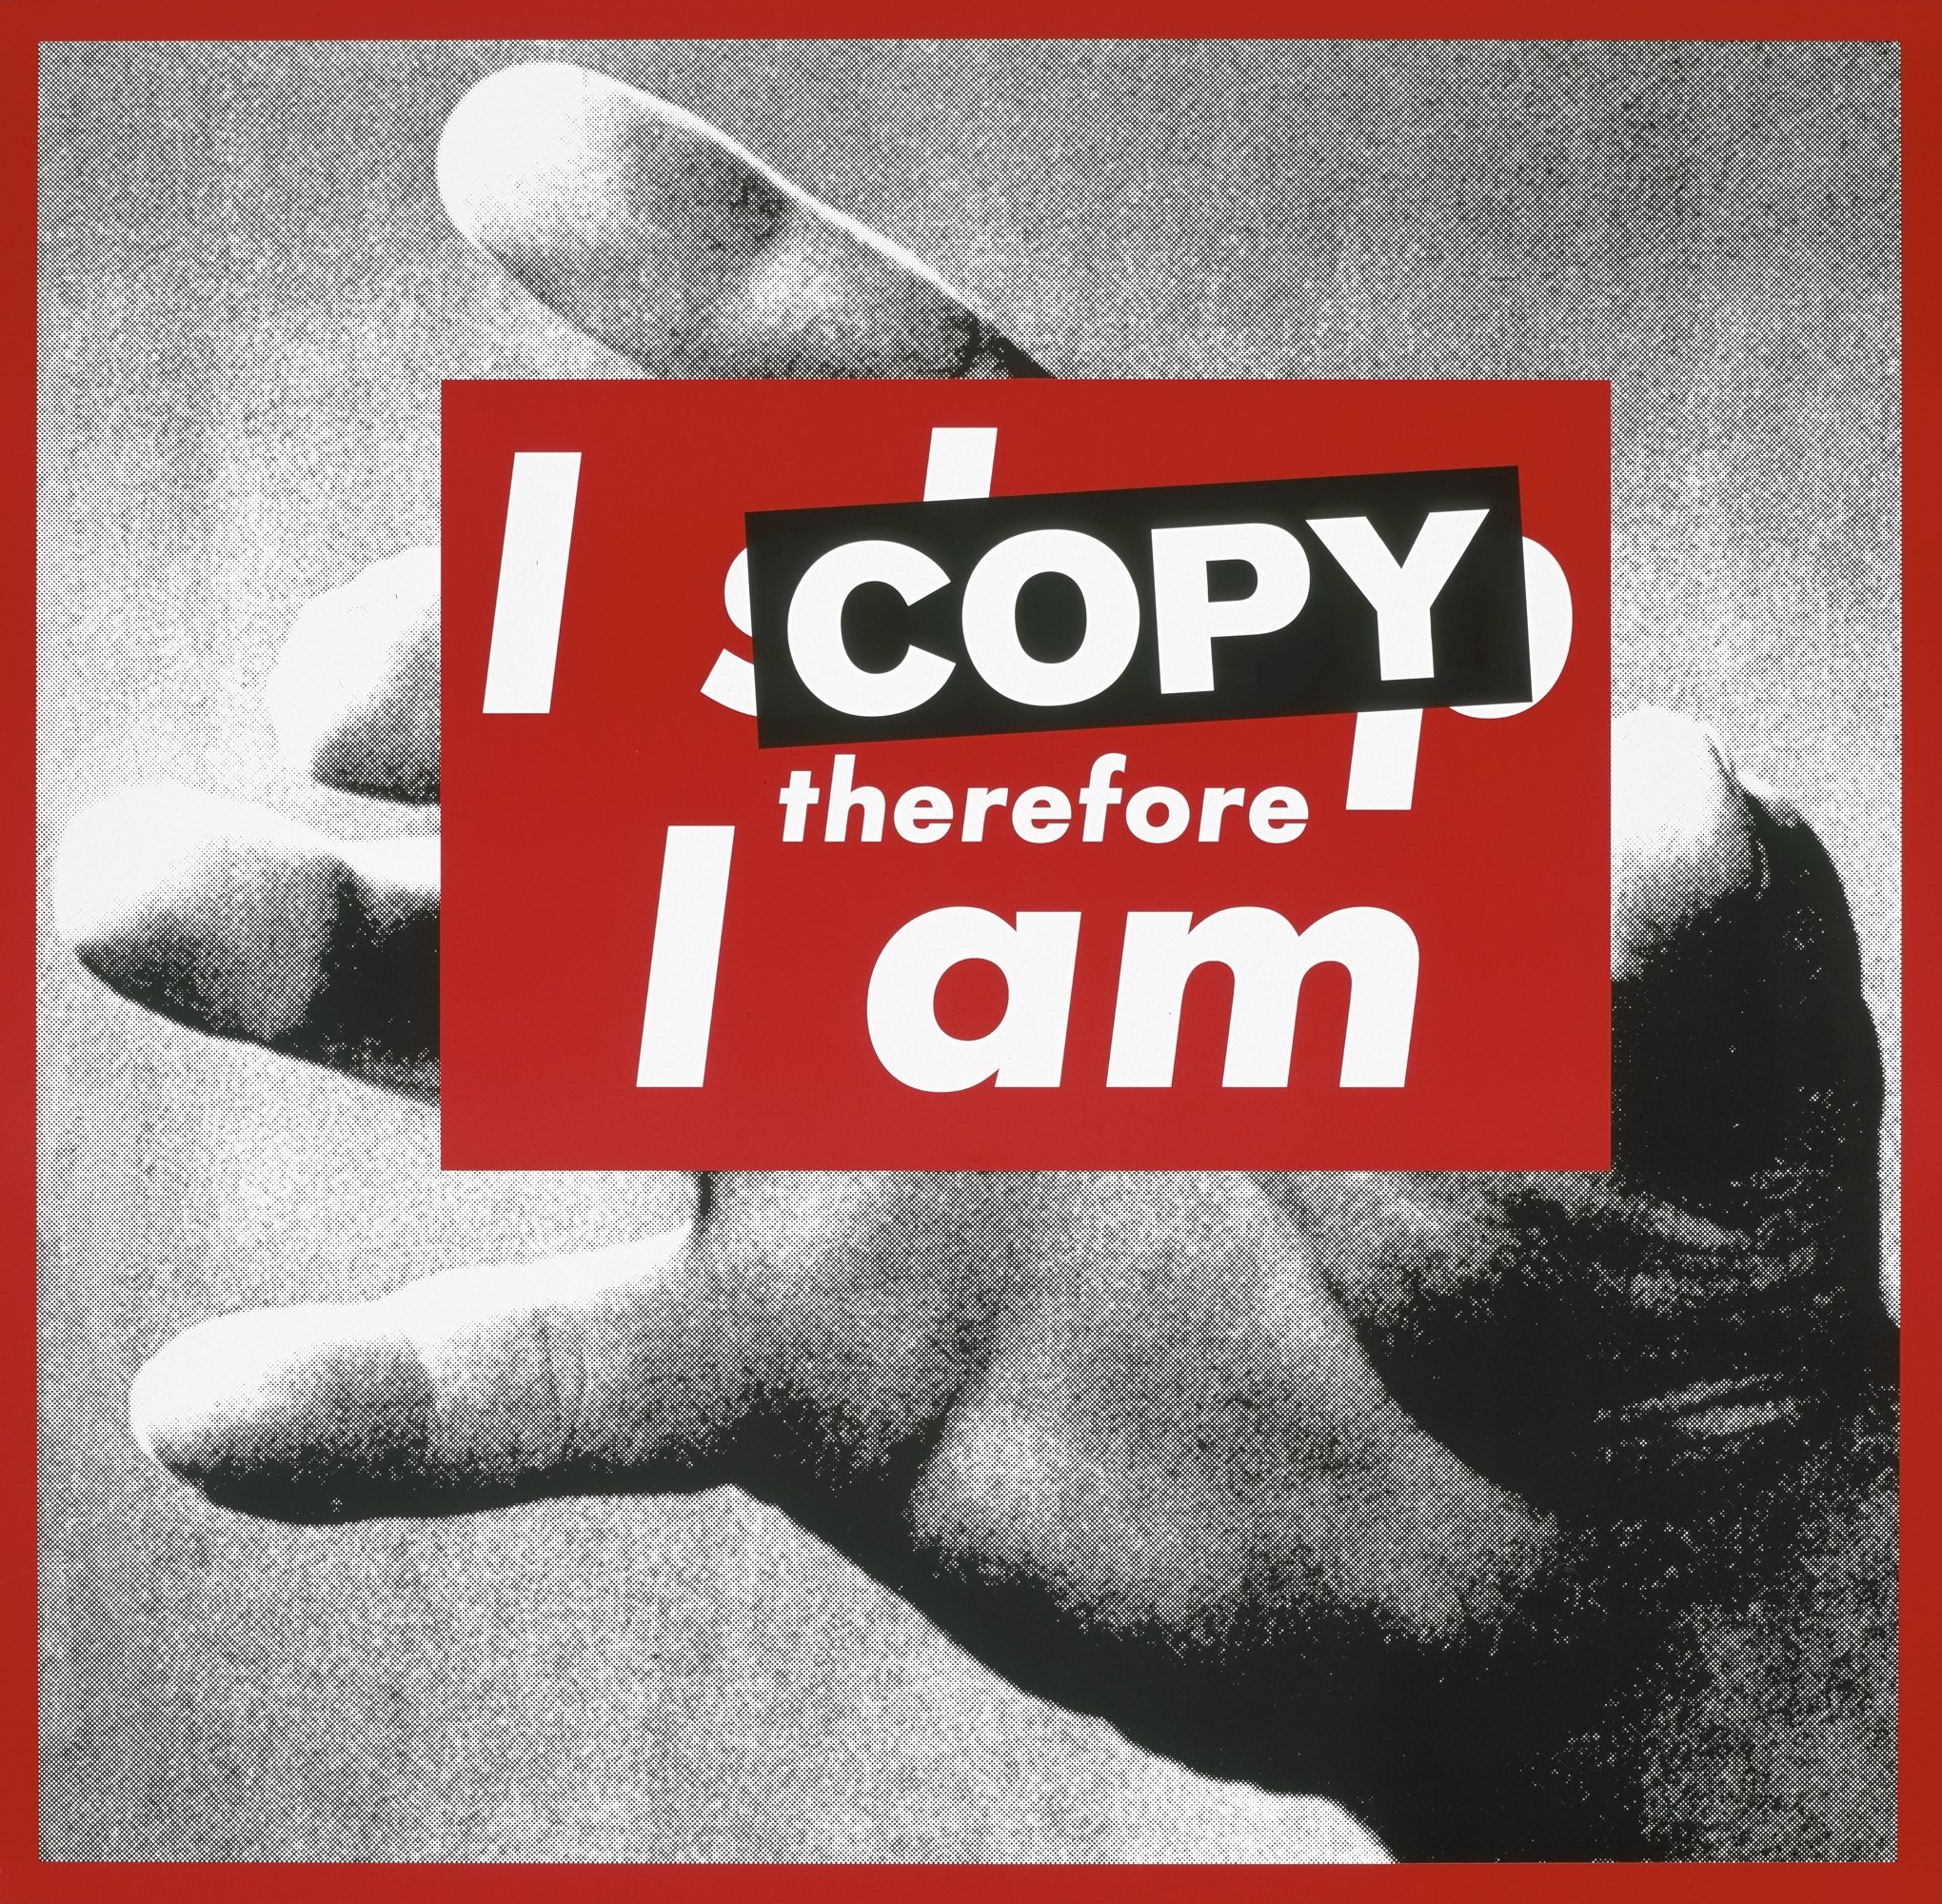 Superflex, 'I Copy Therefore I Am', 2011, offset print on paper (poster) on aluminum, 60 by 65 centimeters.  (Courtesy of Pera Museum)